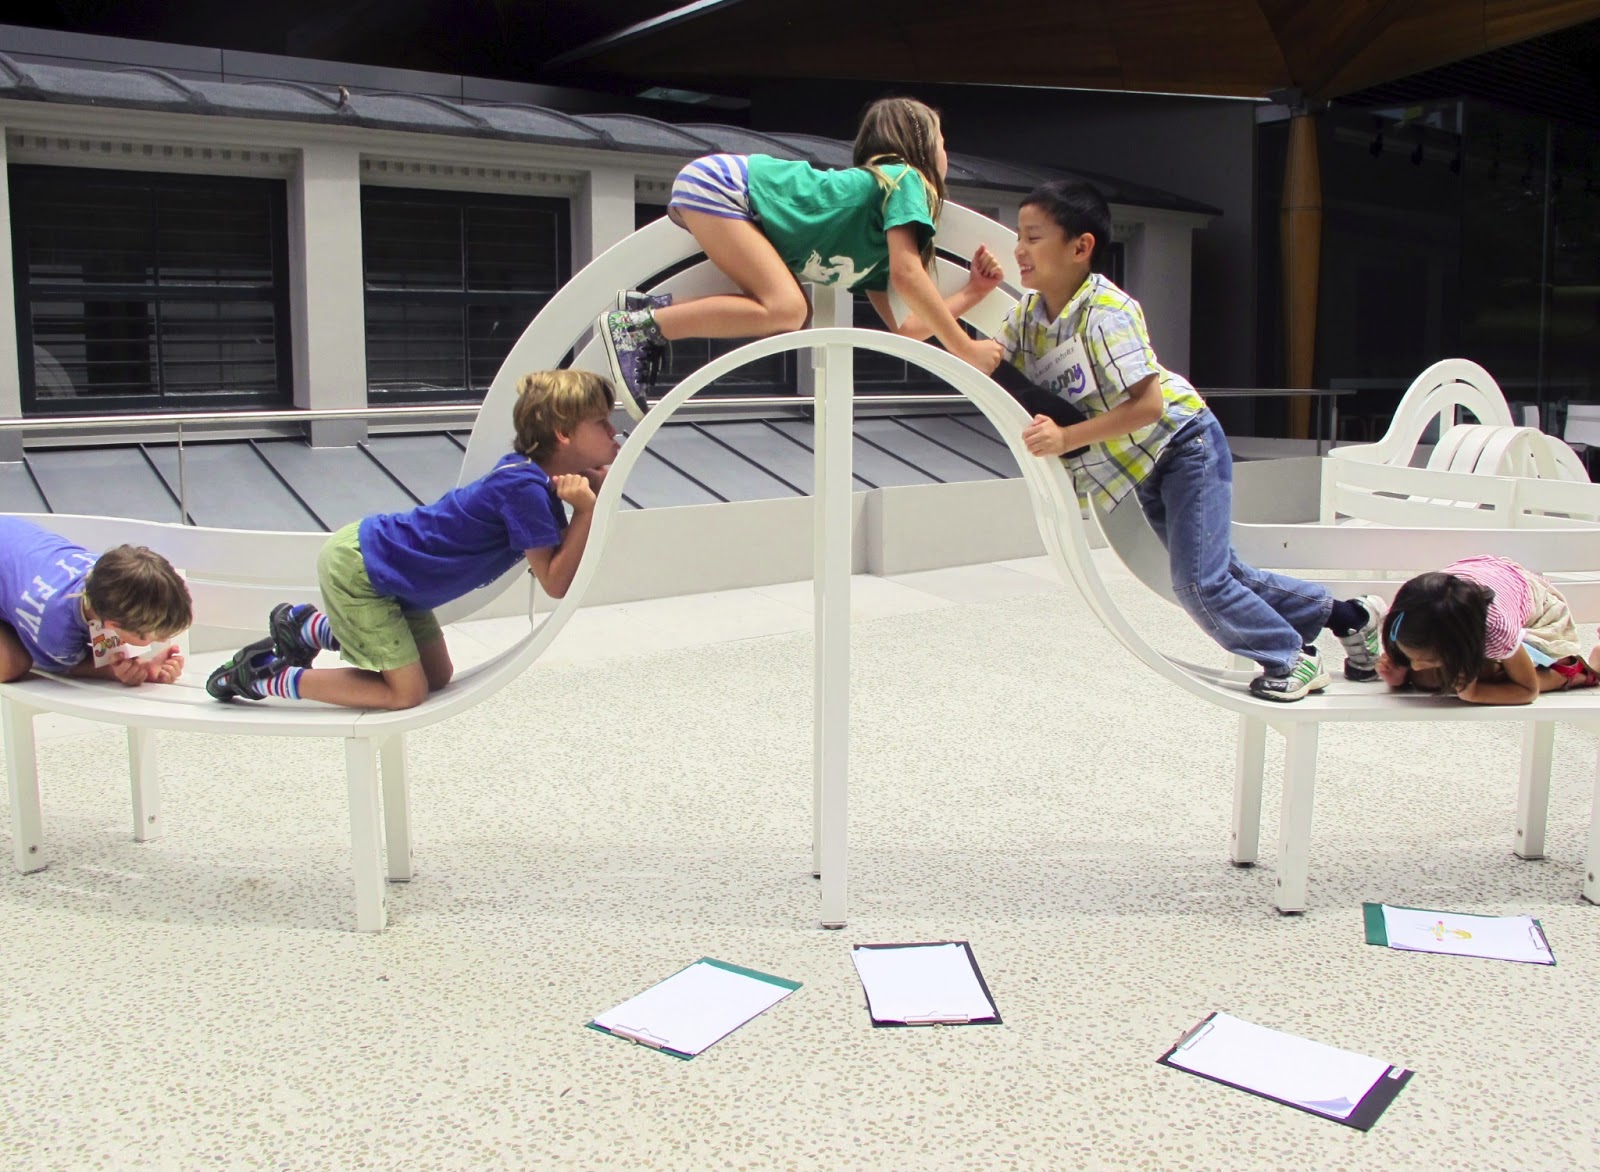 <p>GET LAUGHING: Play &#39;connections&#39; on Hein&#39;s sculpture - a leader calls out 3 or more specific parts of the body (e.g. right ear, left elbow, right knee). The players have to connect all said body parts to the sculpture as quickly as possible. Hilarity ensues.</p>
